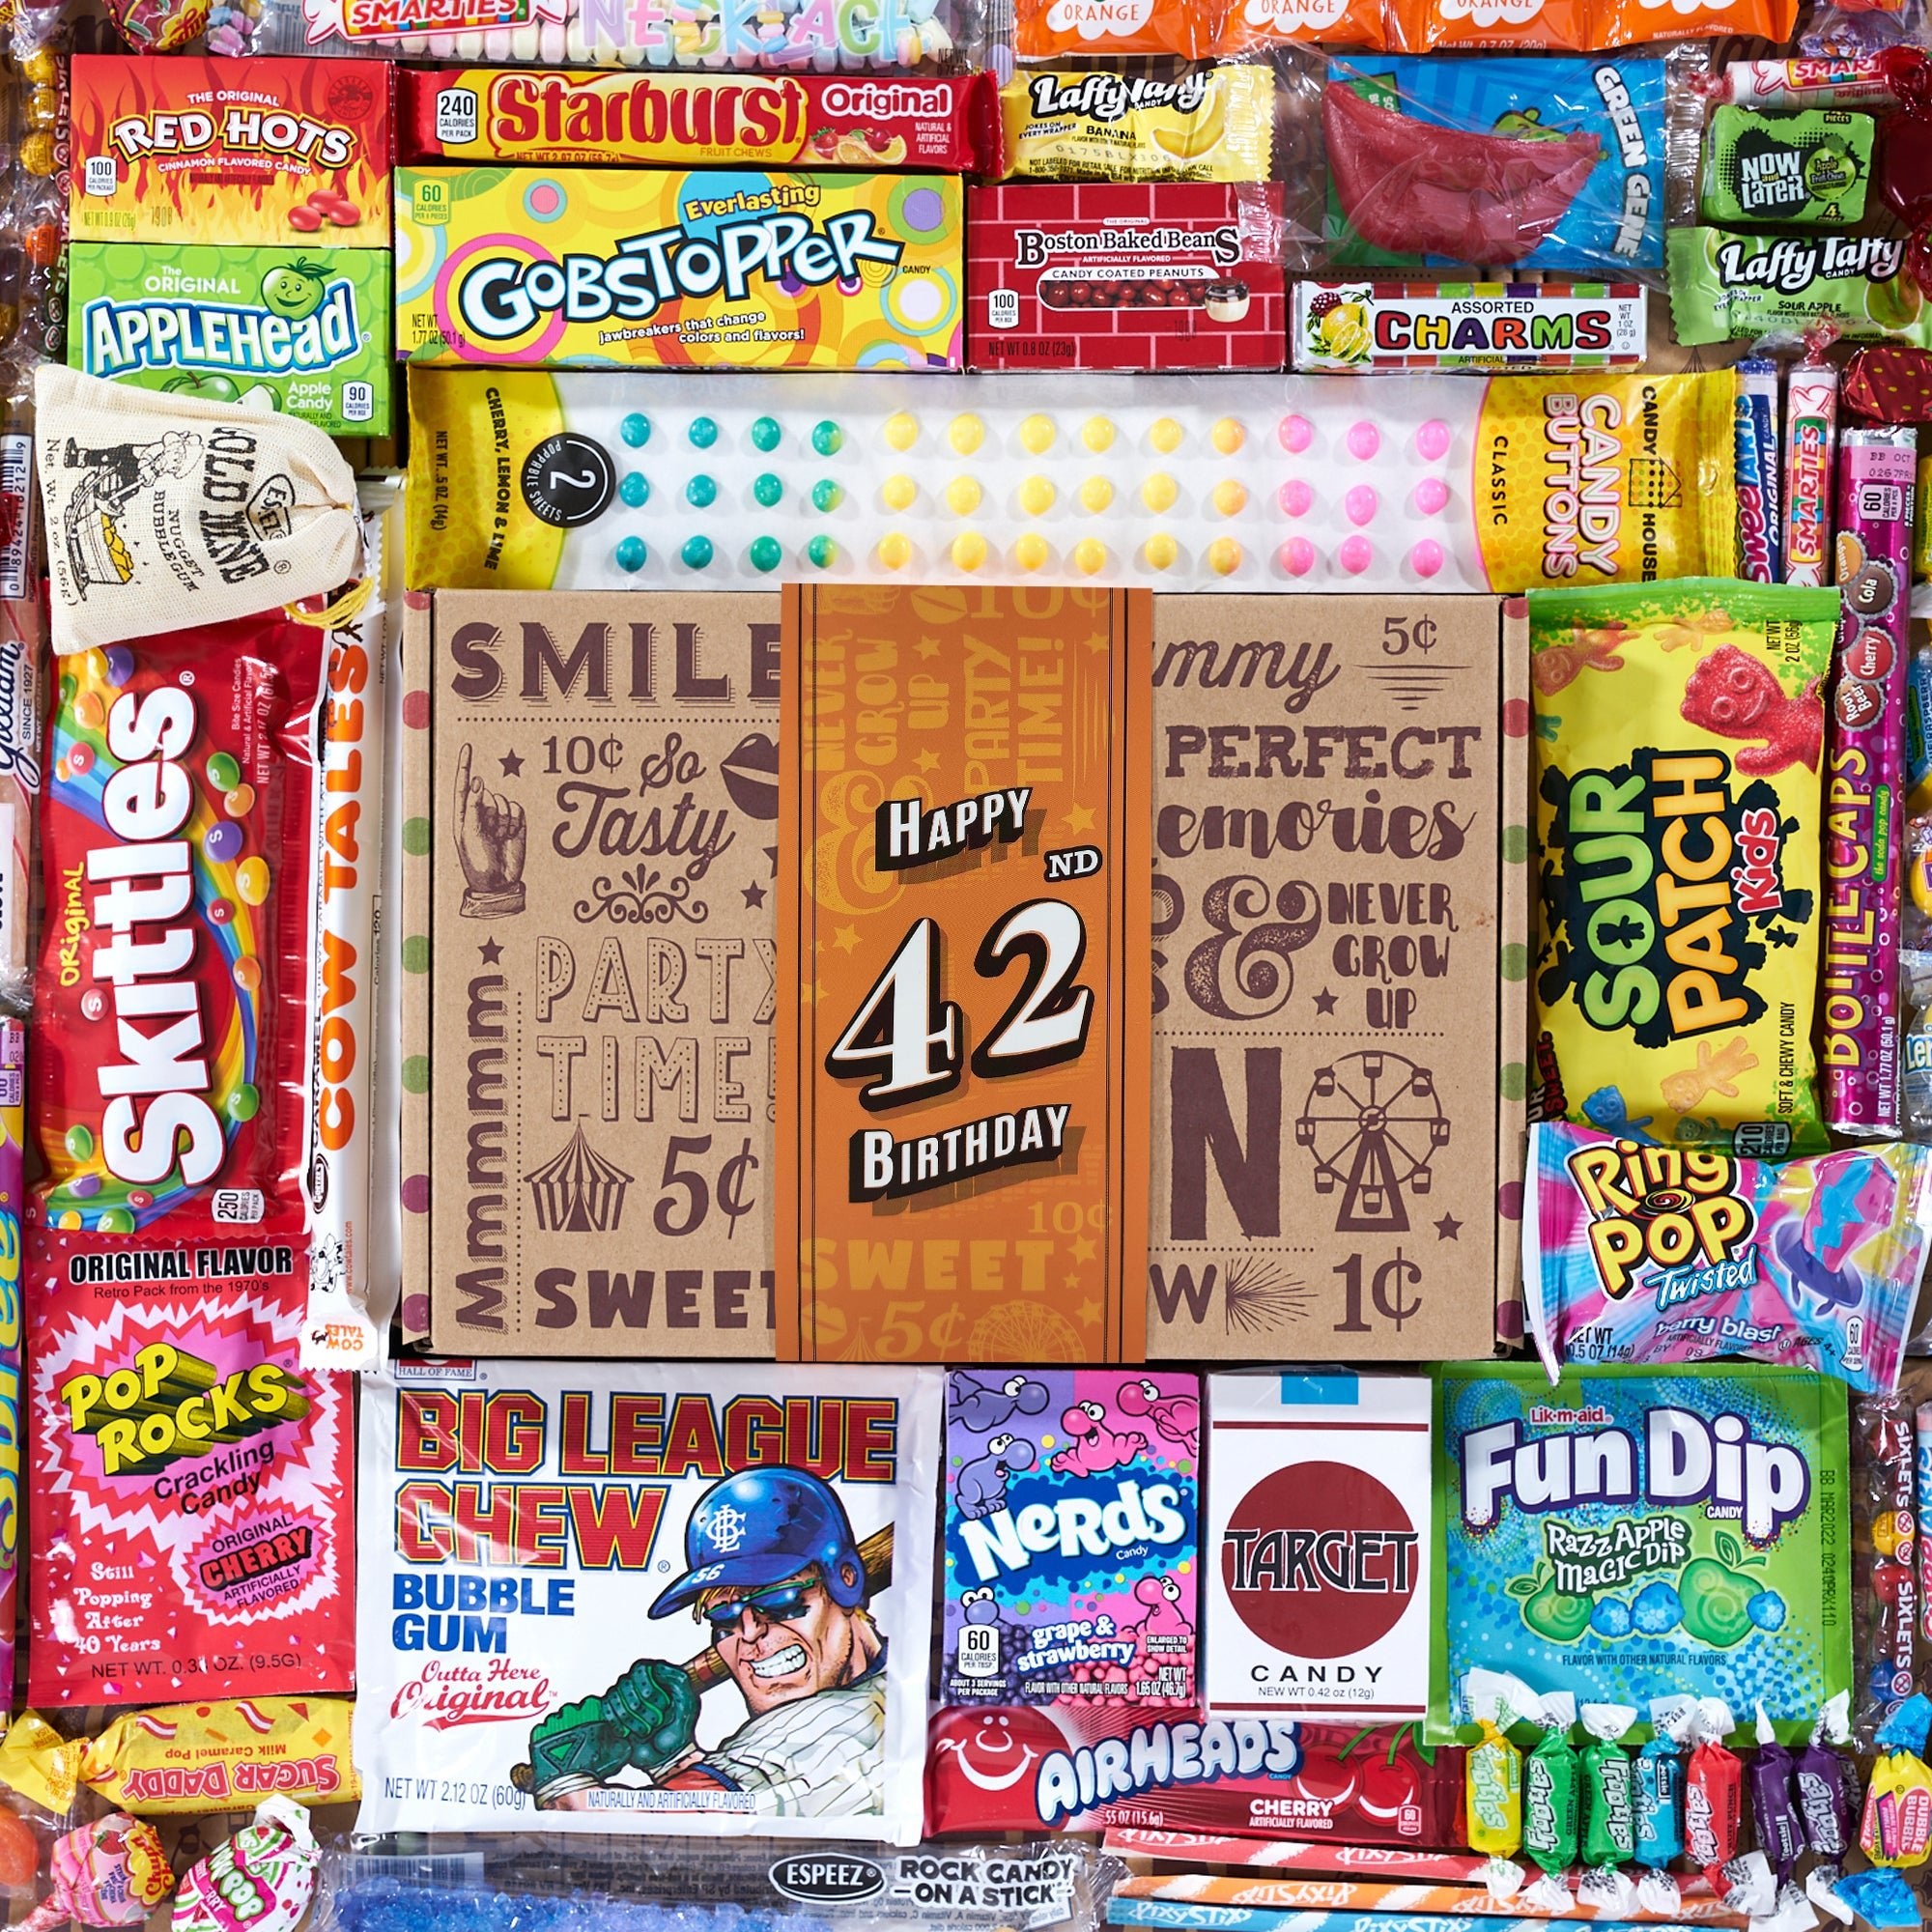 42nd Birthday Retro Candy Gift - Vintage Candy Co.